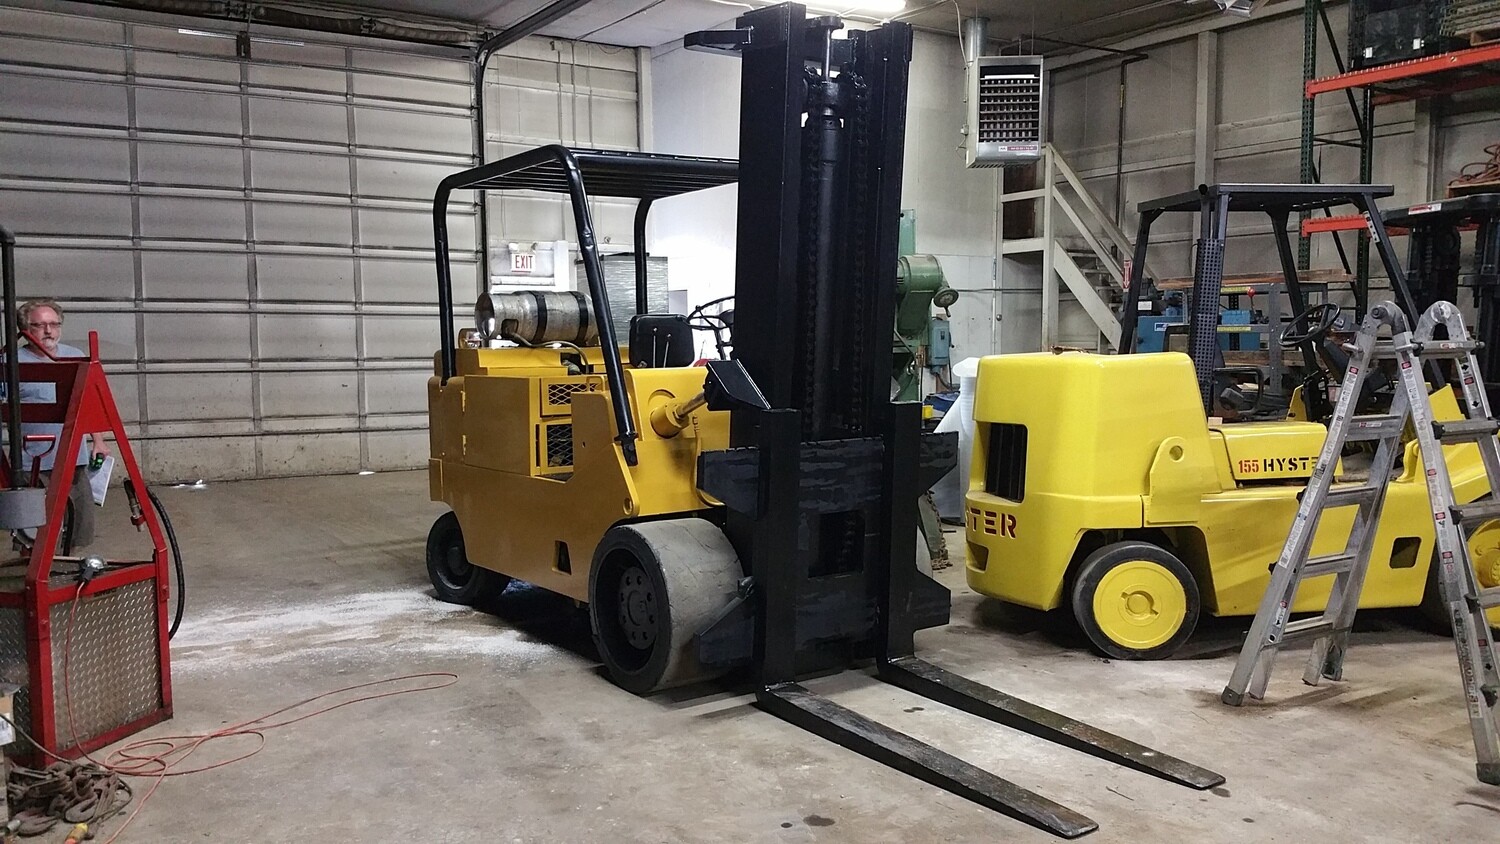 20 000lb Cat Towmotor Forklift For Sale 10 Ton